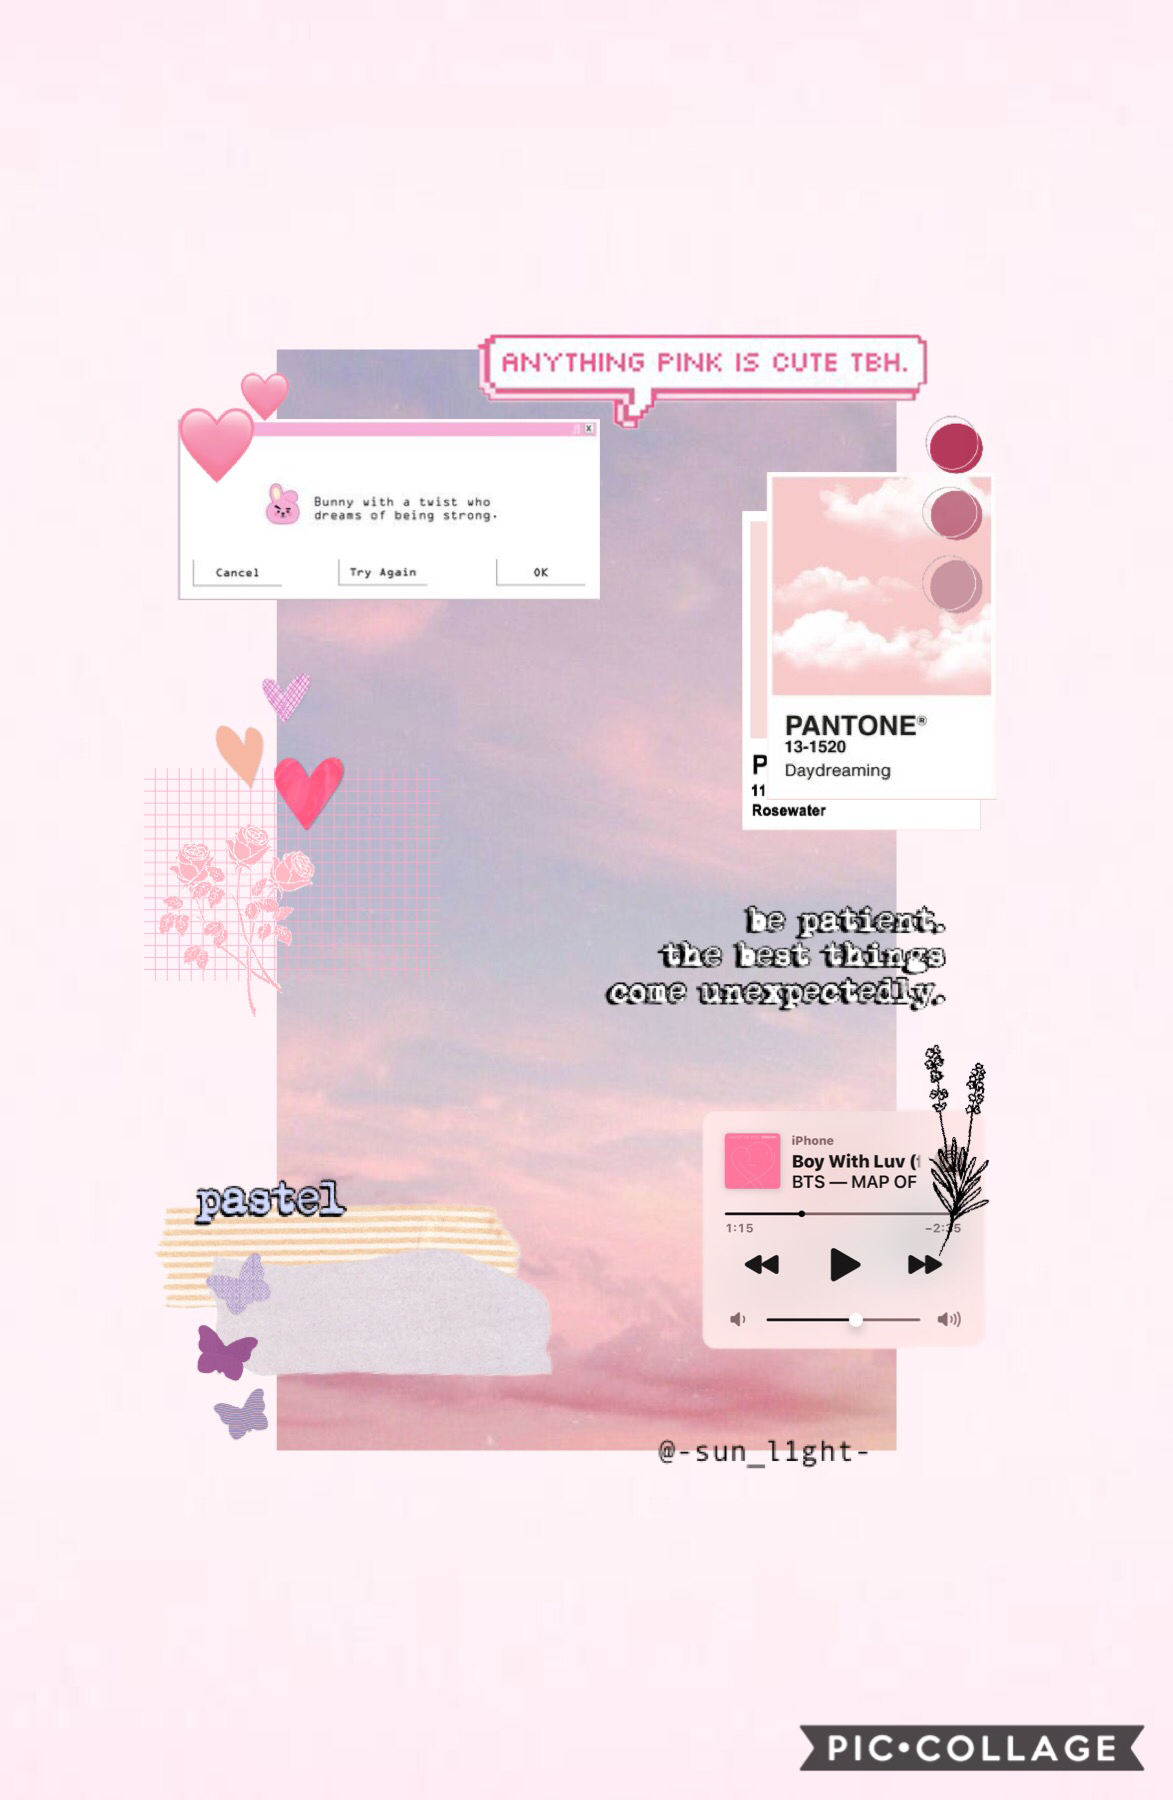 🎀 cute lil pink edit from a while back! 🌷
any one else here who enjoys BTS? I’m only a small fan and like a few songs, as I haven’t explored very many; suggest some of your favs below! (also isn’t BT21 so cute!! 💓) 7•9•20